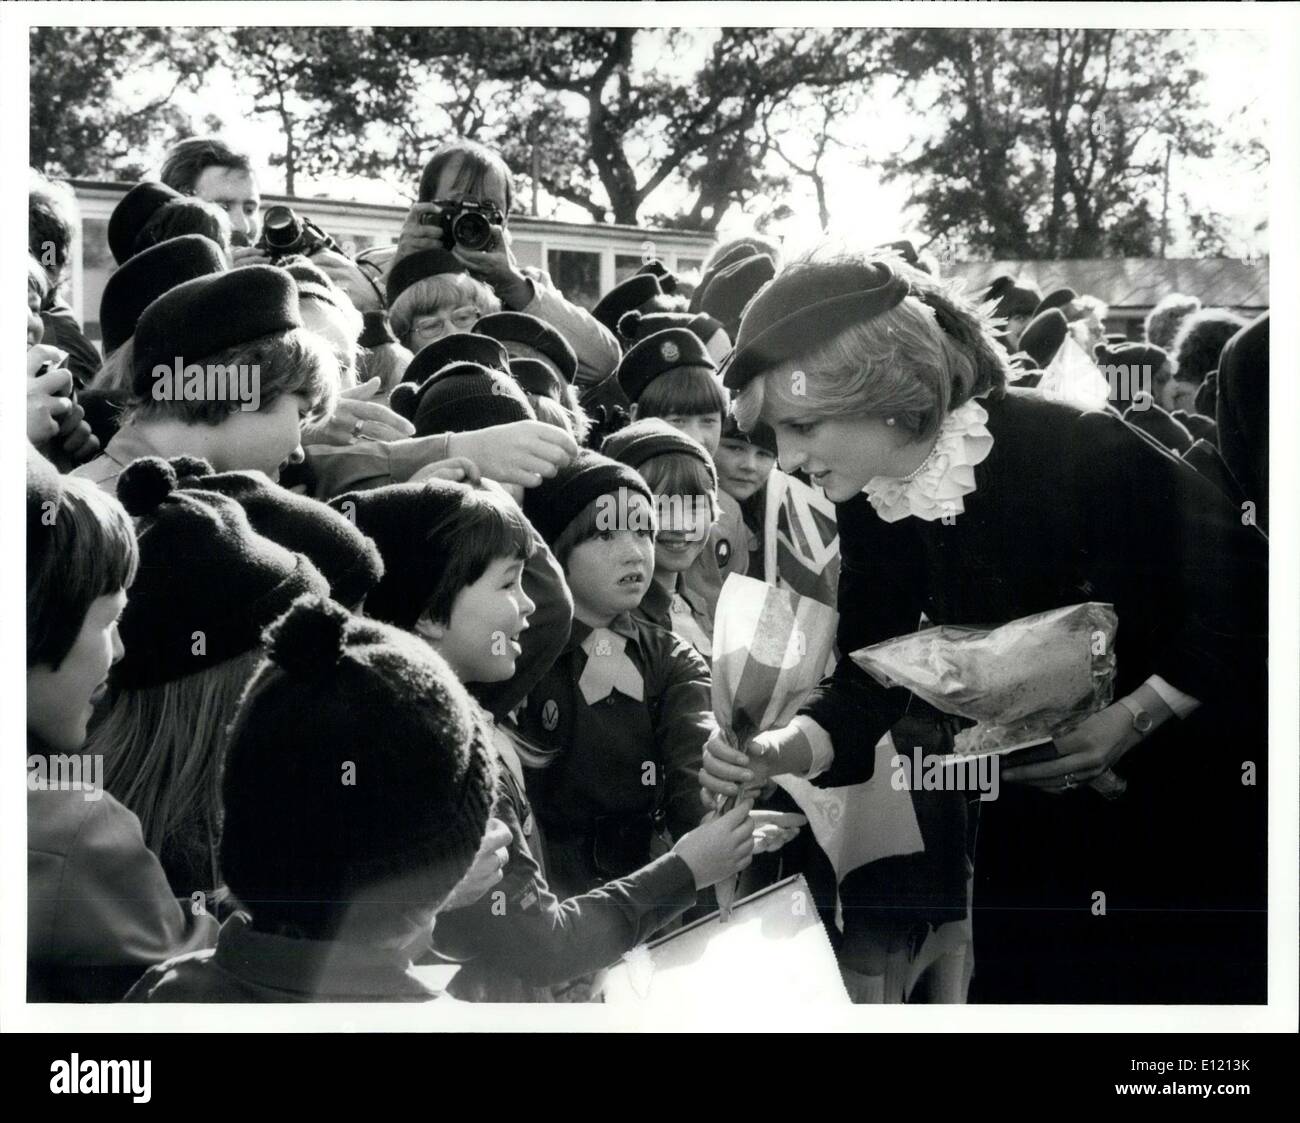 Oct. 06, 1981 - Princess of Wales Charms the children of Builth Wells: As part of her tour of the principality with her husband, the Princess of Wales yesterday met hundreds of children at the Royal showground at Builth walle. In contrast to the previous rainswept days of the tour the sun shone brightly as the Prince, dressed in a euit of burgundy velvet with a matching ostrich - feather trimmed hat, stopped to chat to her young admirers including many cubs and Guides. The former Kindergarten teacher shock hands with and accepted shy kisses from some of her young well - wishers Stock Photo